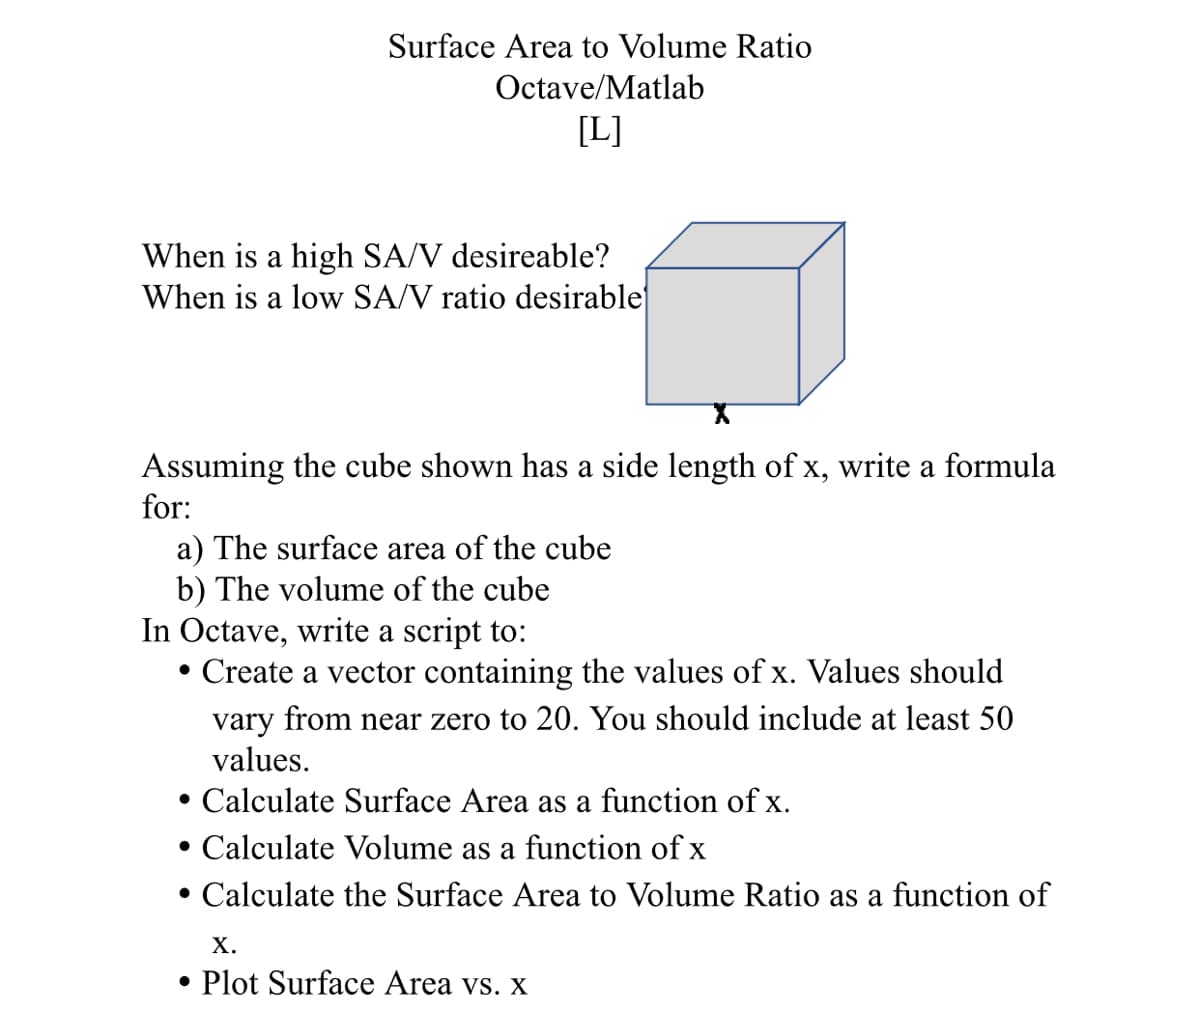 Surface Area to Volume Ratio
Octave/Matlab
[L]
When is a high SA/V desireable?
When is a low SA/V ratio desirable
Assuming the cube shown has a side length of x, write a formula
for:
a) The surface area of the cube
b) The volume of the cube
In Octave, write a script to:
• Create a vector containing the values of x. Values should
vary from near zero to 20. You should include at least 50
values.
• Calculate Surface Area as a function of x.
• Calculate Volume as a function of x
Calculate the Surface Area to Volume Ratio as a function of
Х.
• Plot Surface Area vs. x
